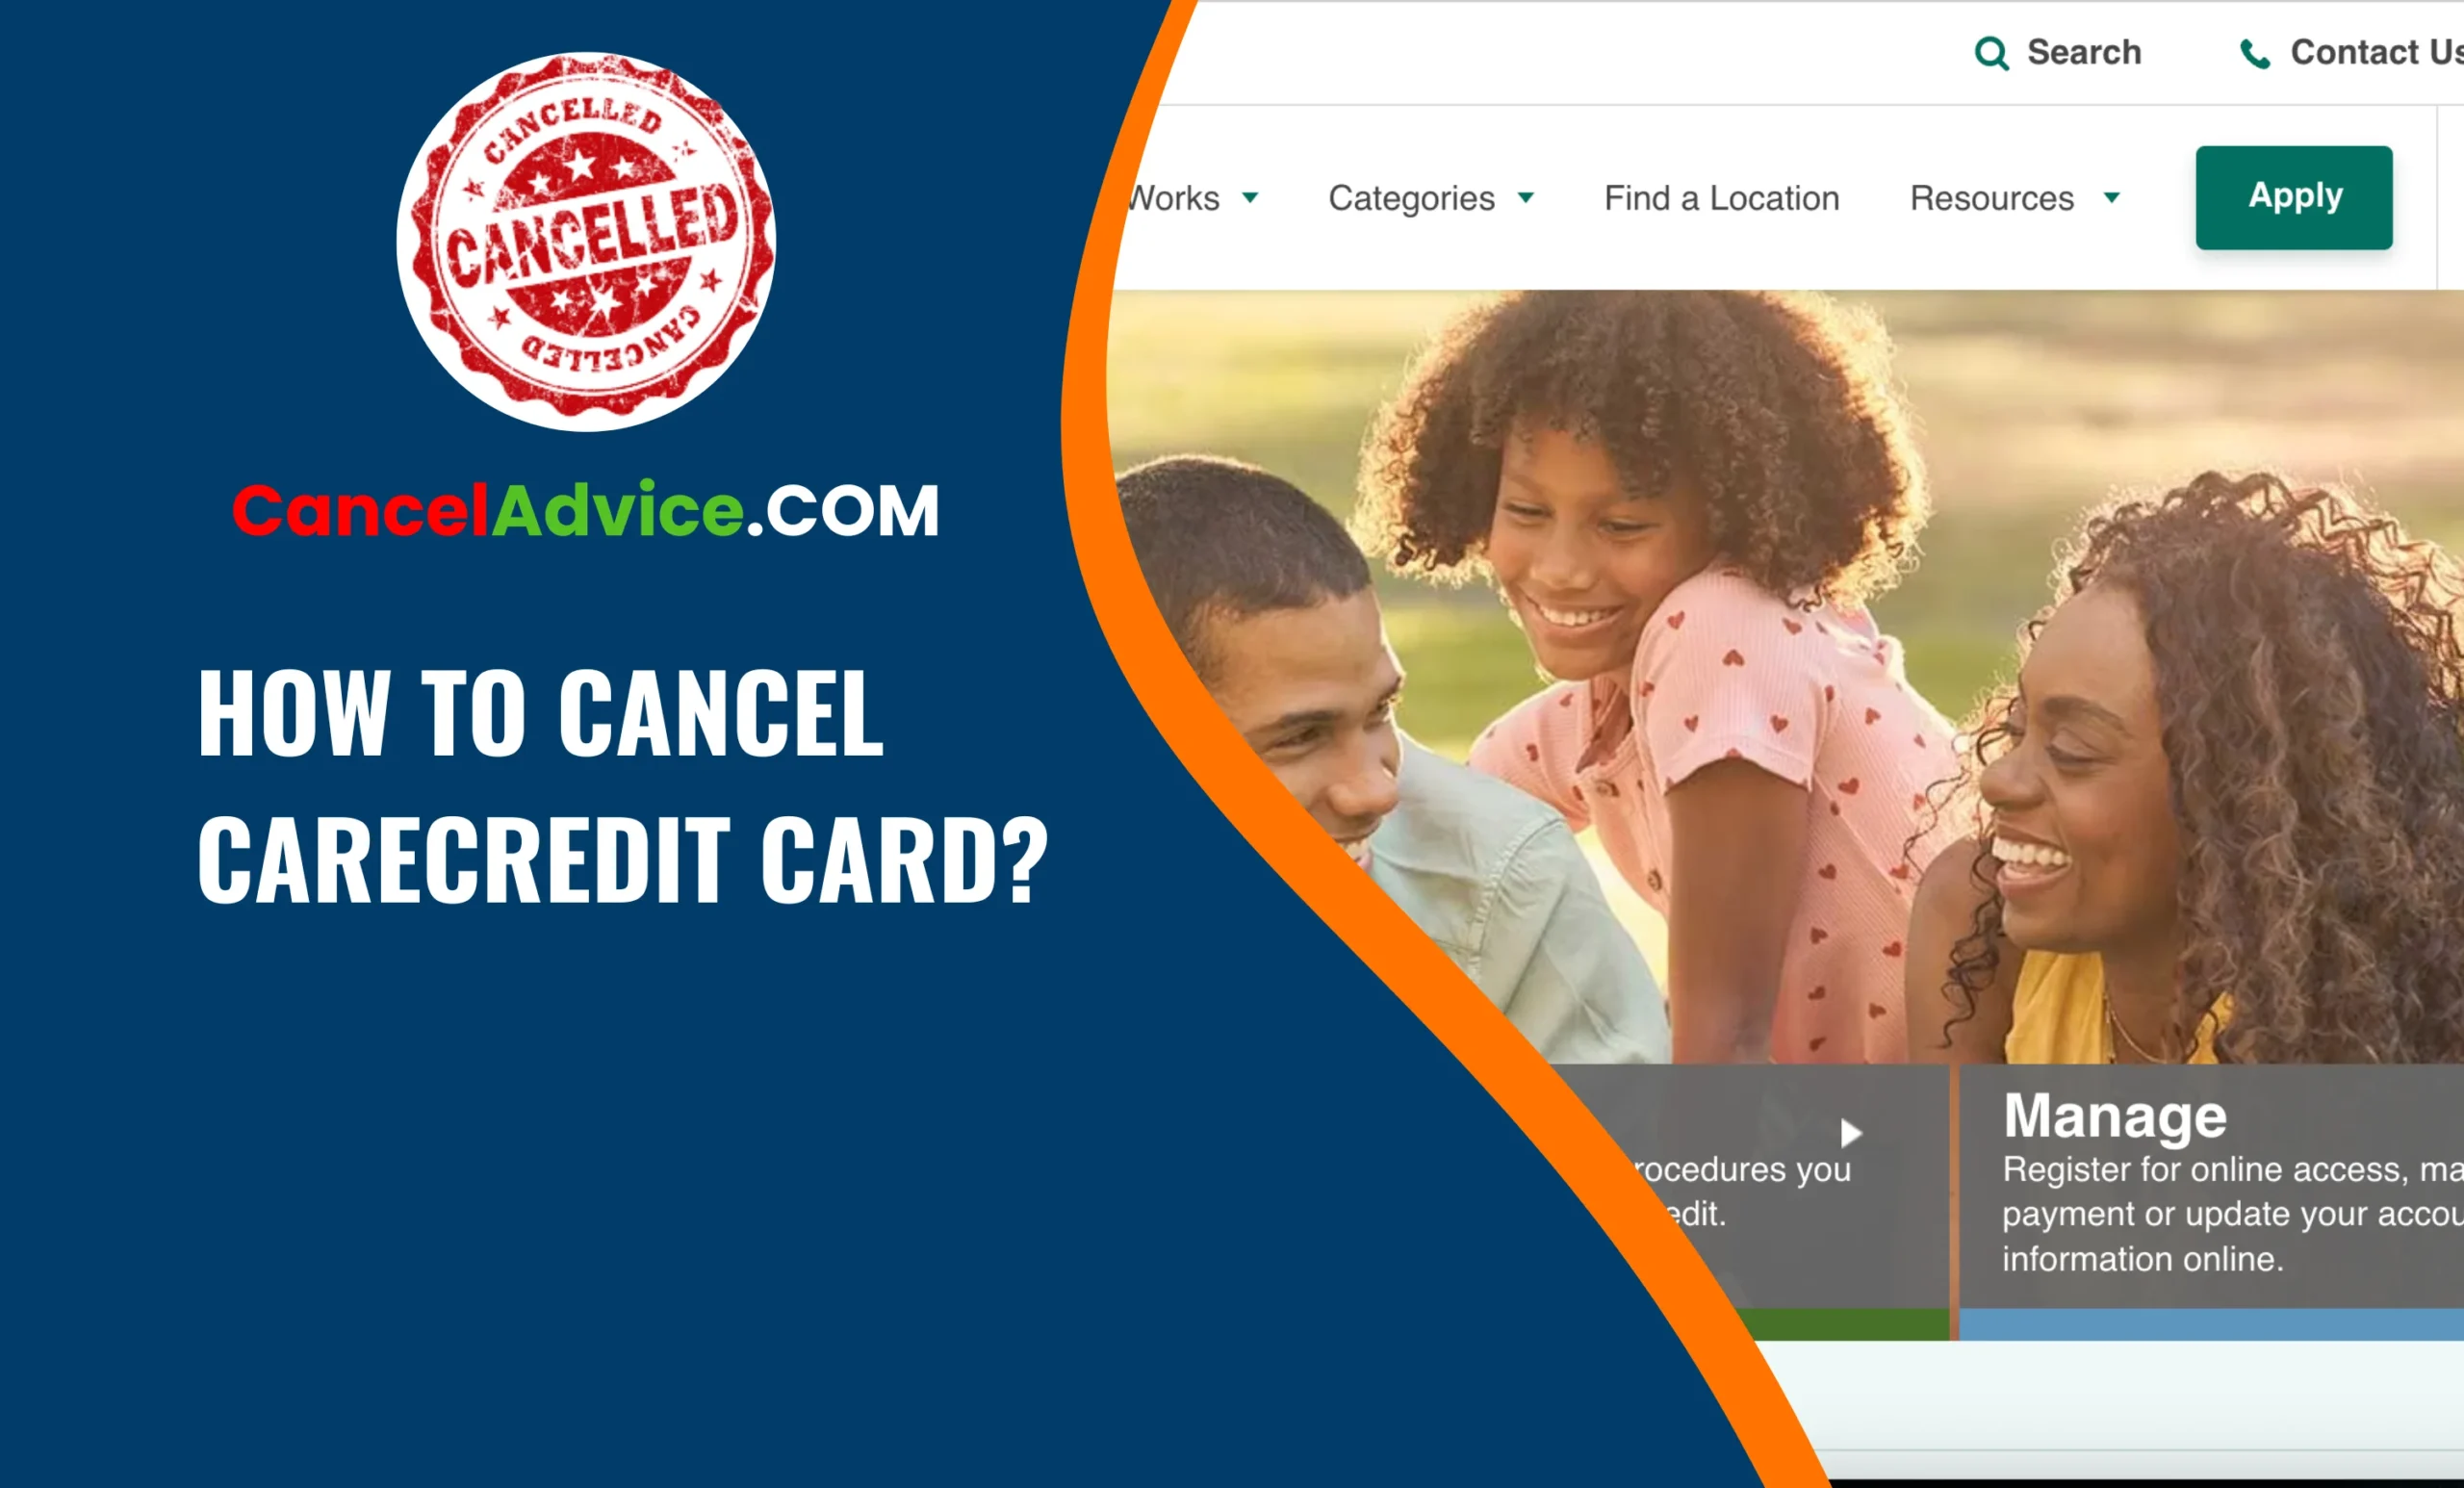 How to Cancel Your CareCredit Card